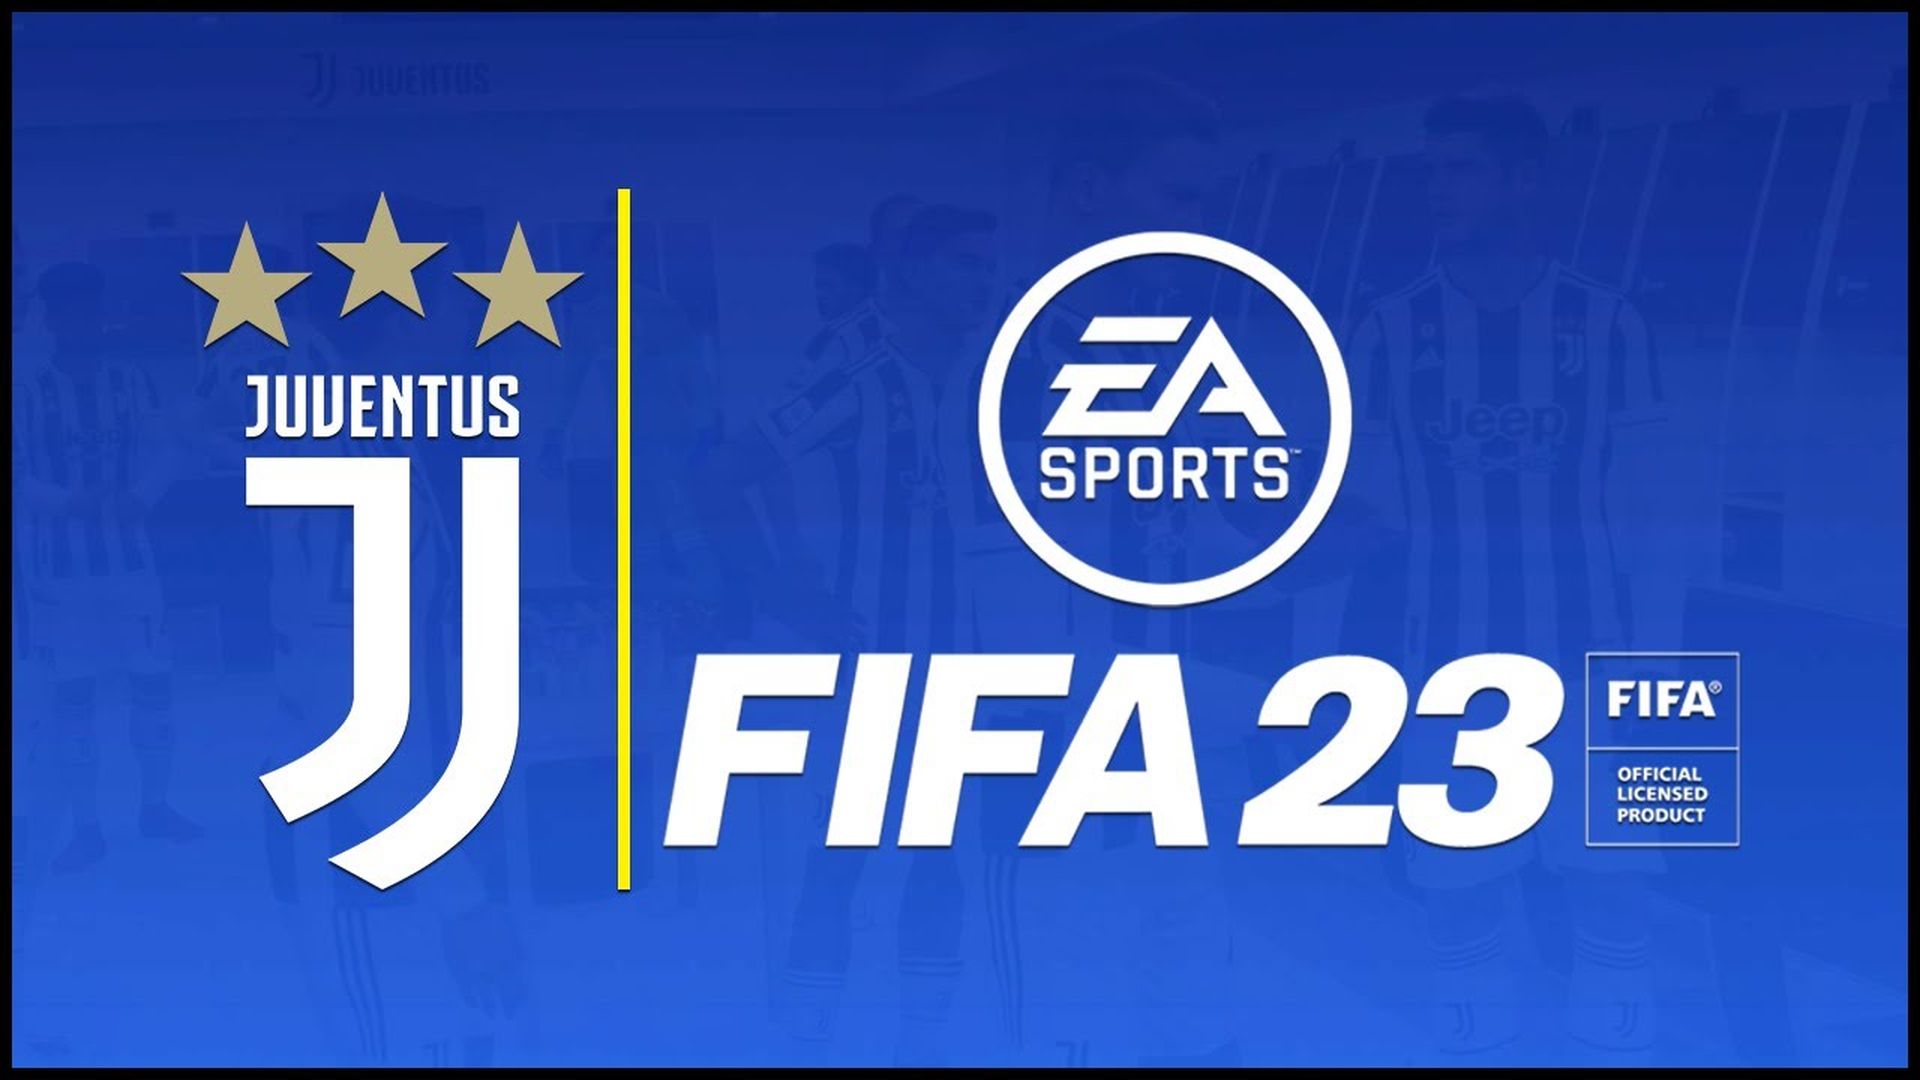 In this article, we are going to be covering FIFA 23 Juventus reveal and its trailer, as the famous Italian club returns to the popular football franchise.